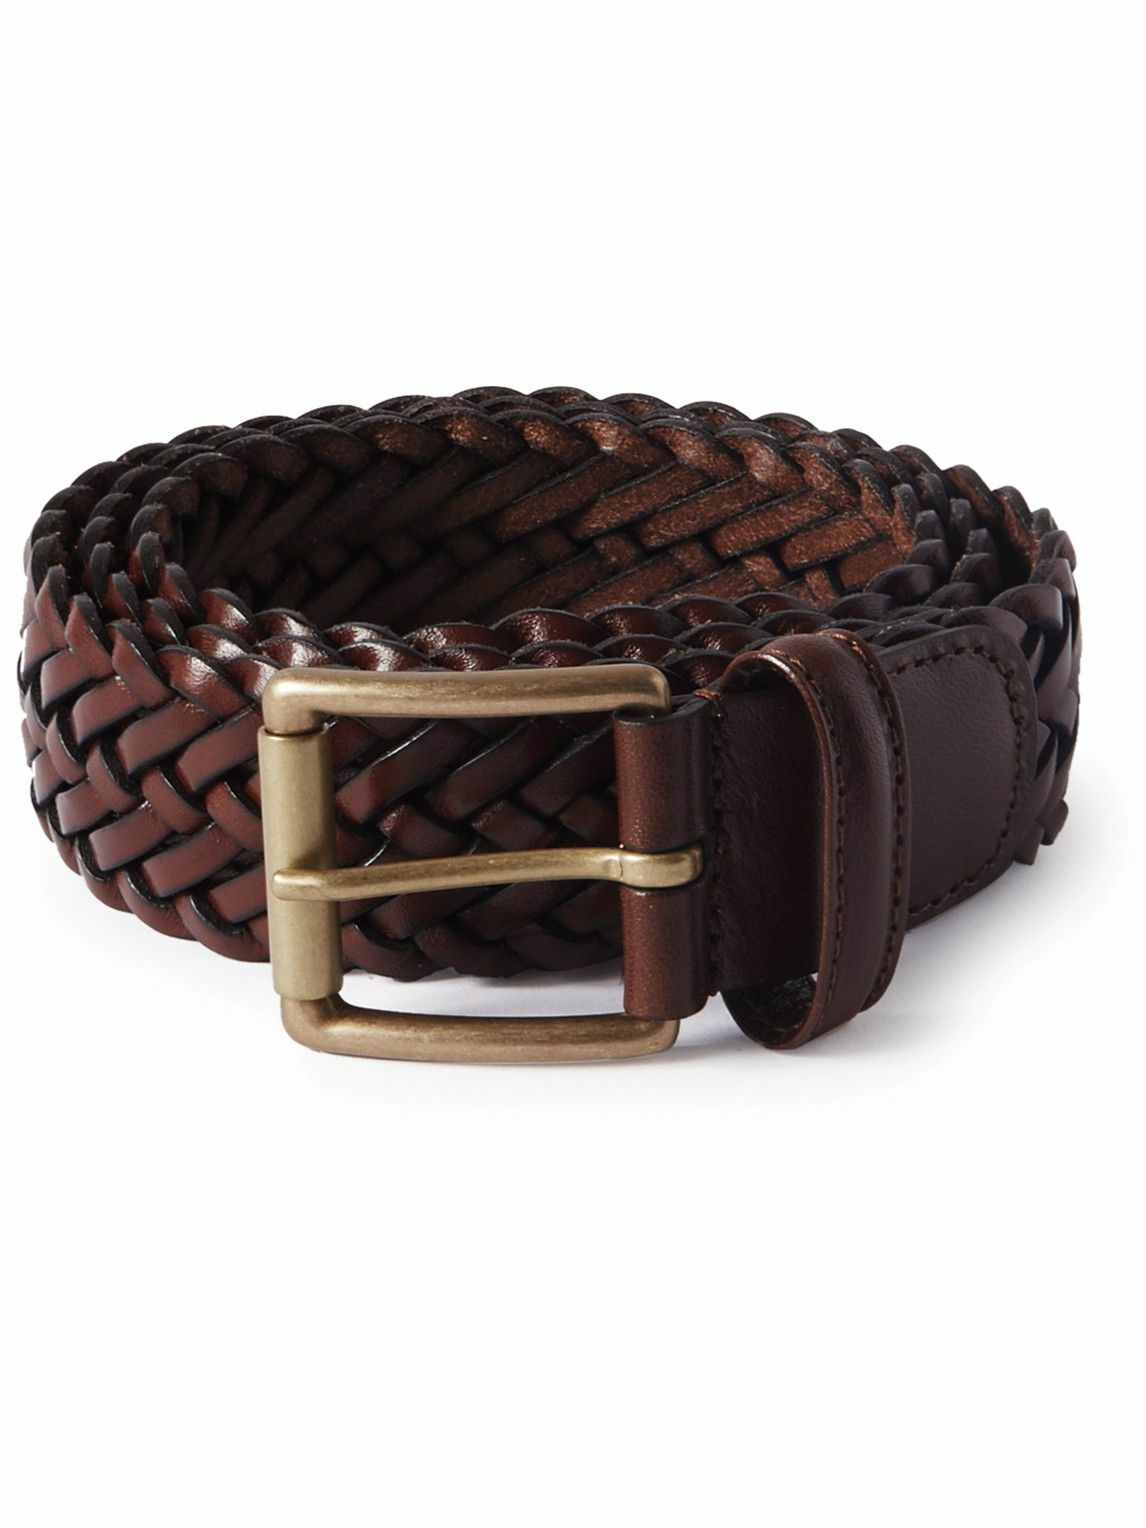 Anderson's - Woven Leather Belt - Brown Anderson's